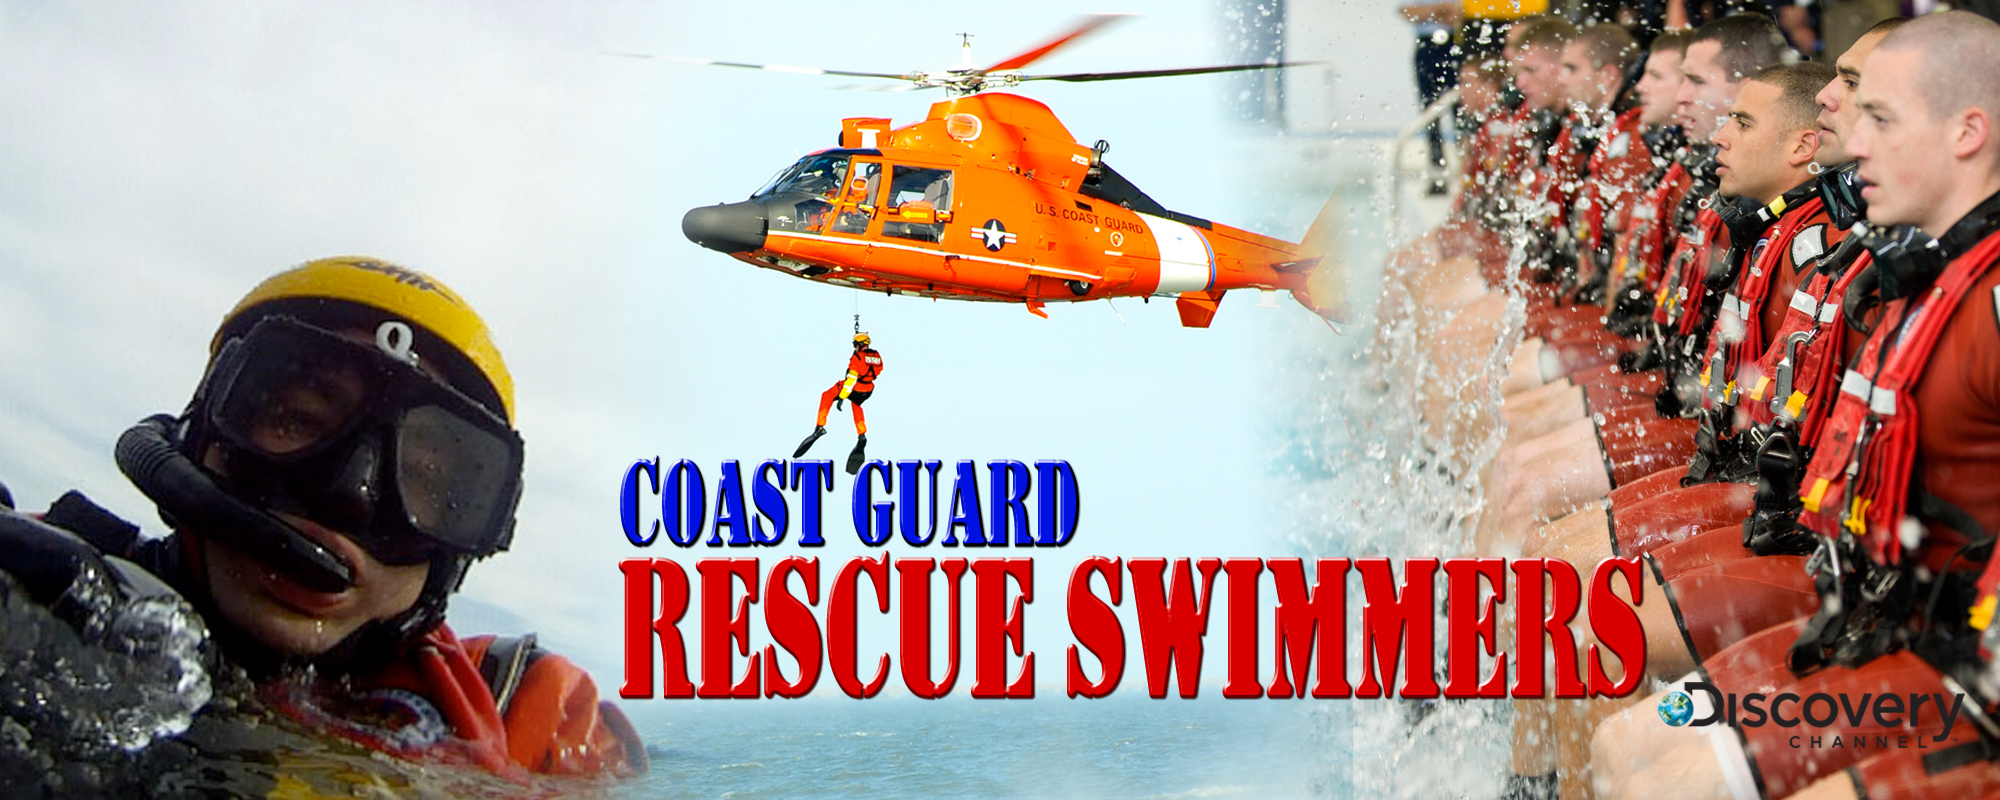 Coast Guard Rescue Swimmers – Discovery Channel